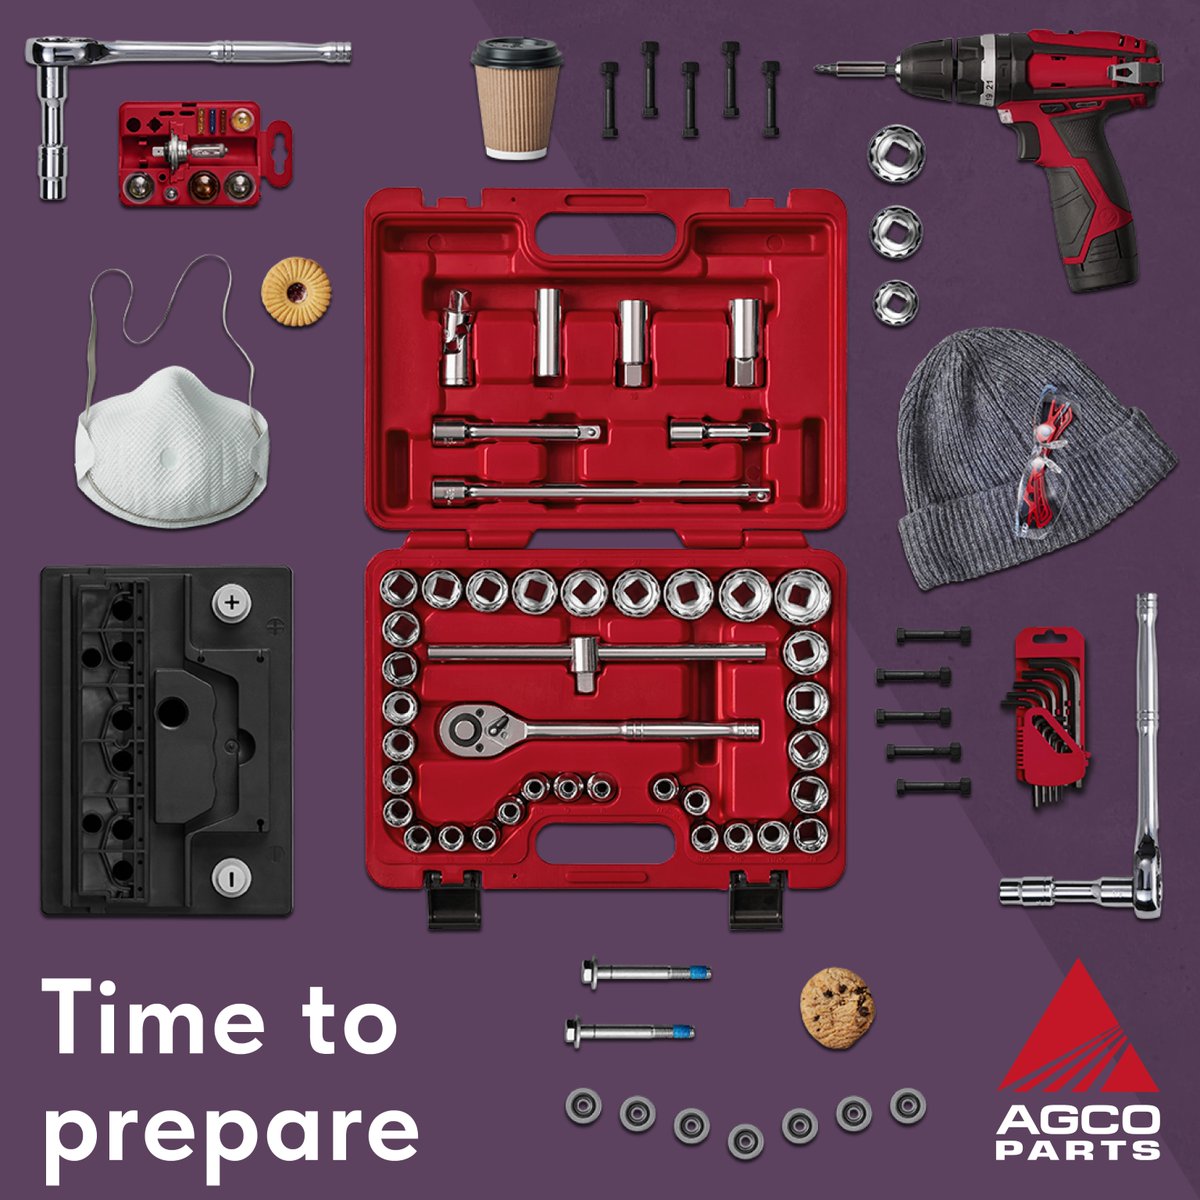 Gear up with AGCO Parts! 🔧 Every tool. Every part. Precision-engineered for top performance. It’s time to prepare for the season ahead! 🚜💪 Contact your local B&B Tractors depot for more information #AGCOParts #ReadyToBuild